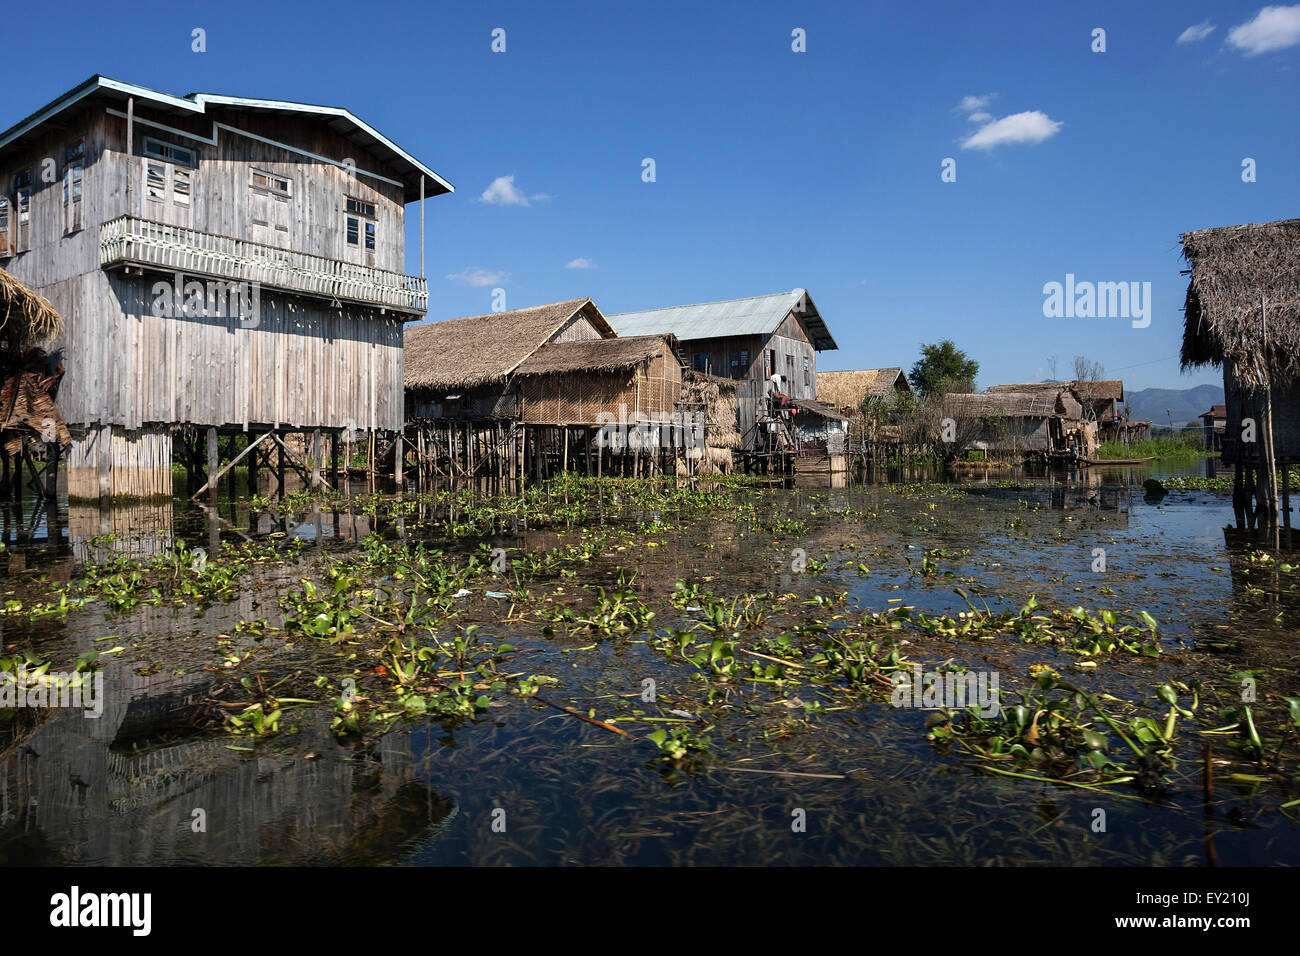 Traditional stilt houses in Inle Lake, Shan State, Myanmar Stock Photo